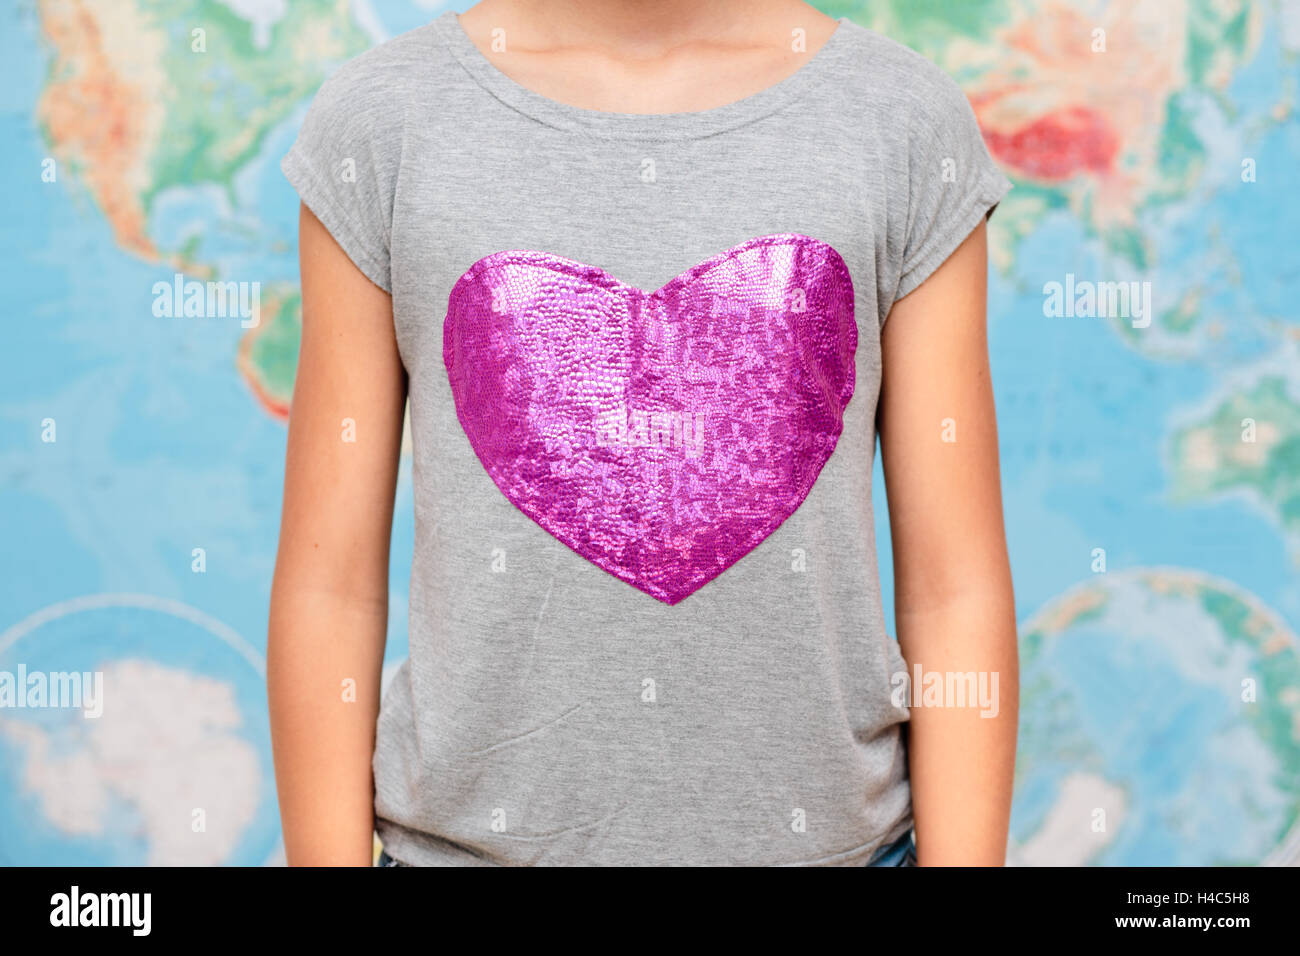 Girl with heart shape on t-shirt with map of world in the background Stock Photo